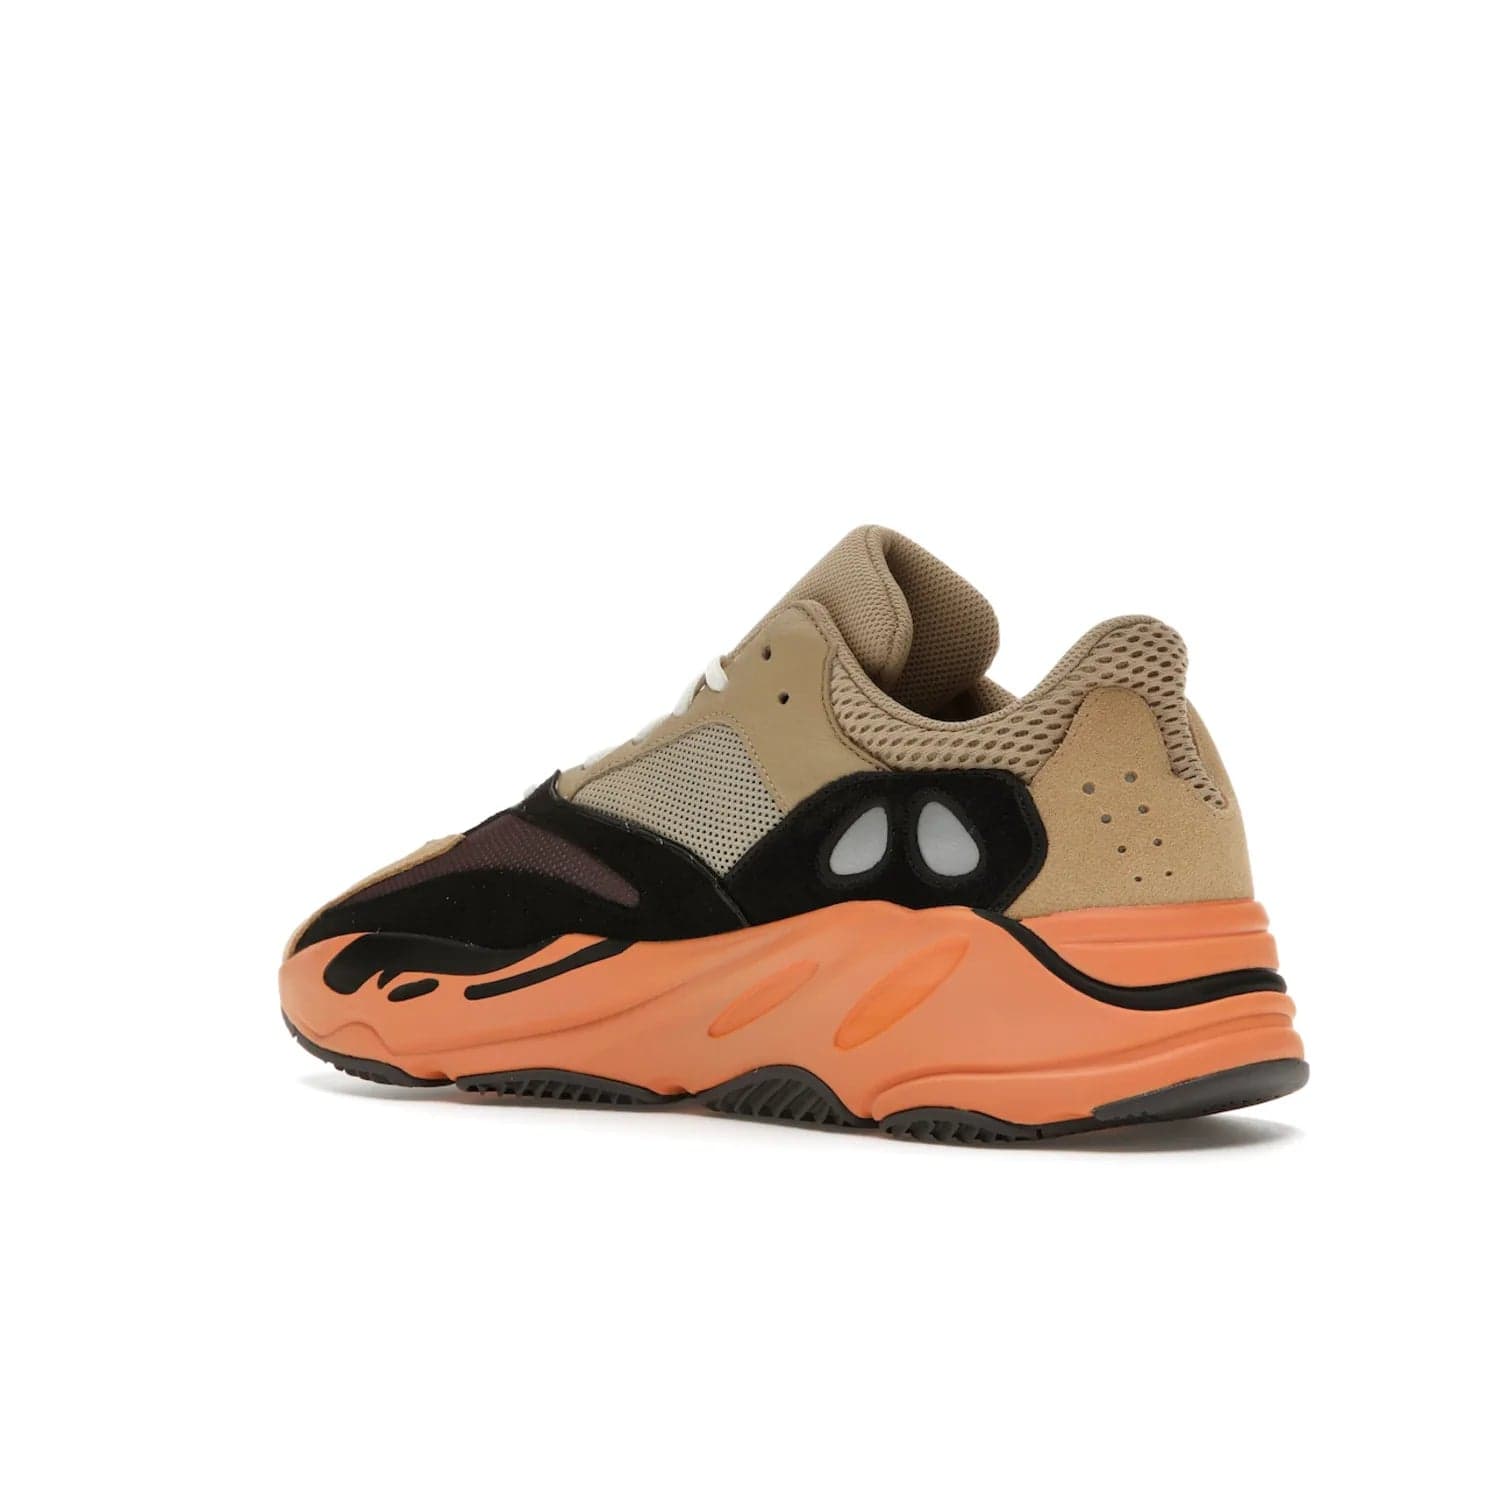 adidas Yeezy Boost 700 Enflame Amber - Image 23 - Only at www.BallersClubKickz.com - Adidas Yeezy Boost 700 Enflame Amber: Eye-catching design with pale yellow, brown, teal, and orange! Get yours in June 2021.